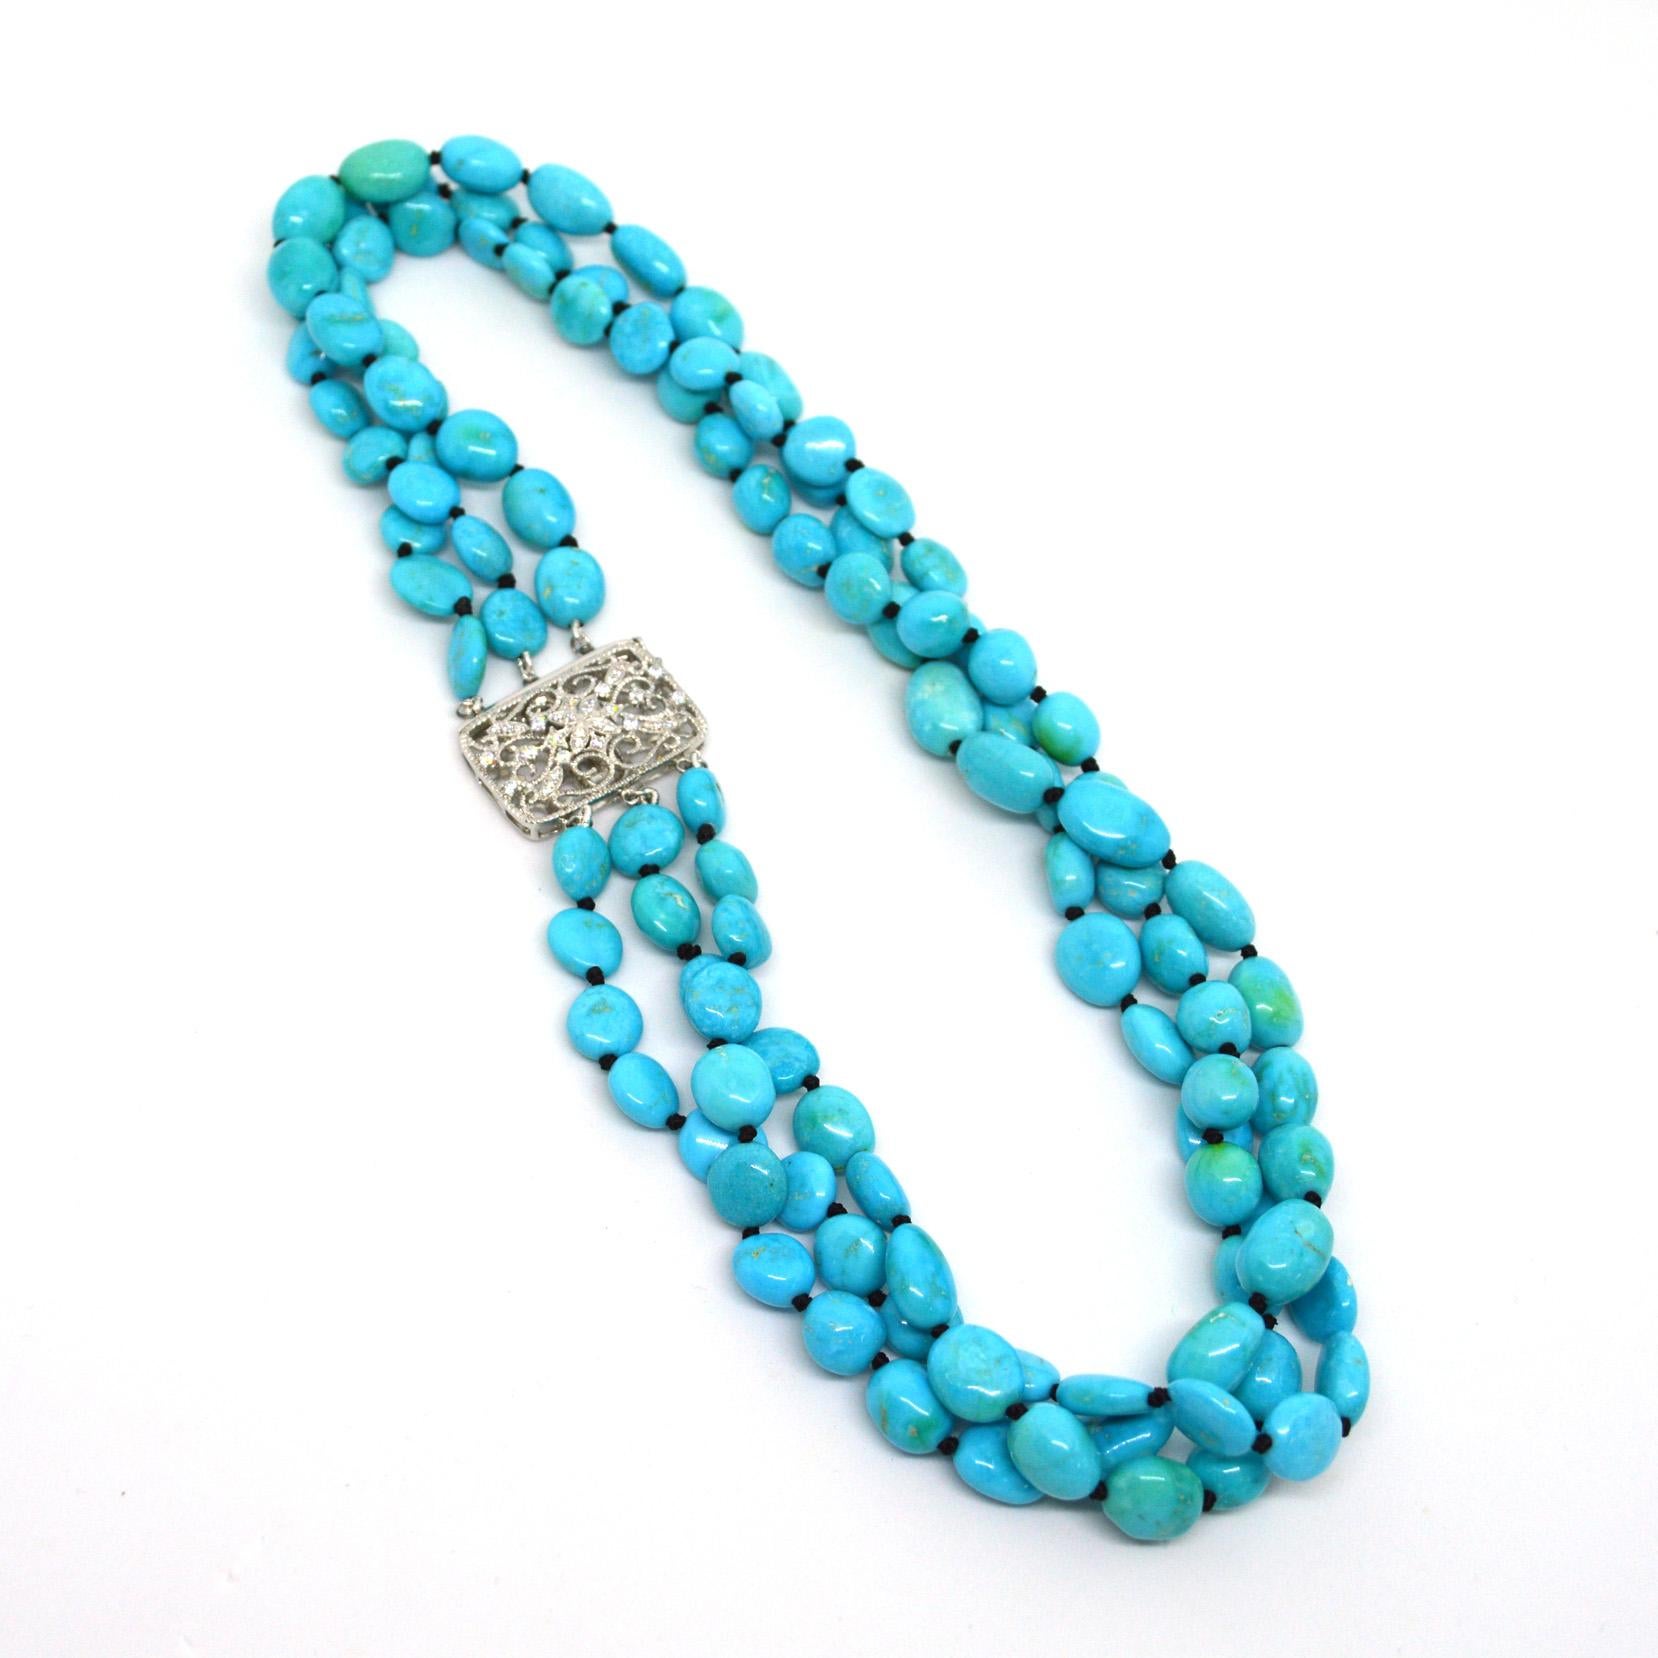 3 strands stabilized natural Sleeping Beauty Turquoise nugget necklace, hand knotted on black thread with a Rhodium plate CZ Sterling Silver clasp. Each bead is approx. 12mm - 14mm
Total length of necklace 53cm.

